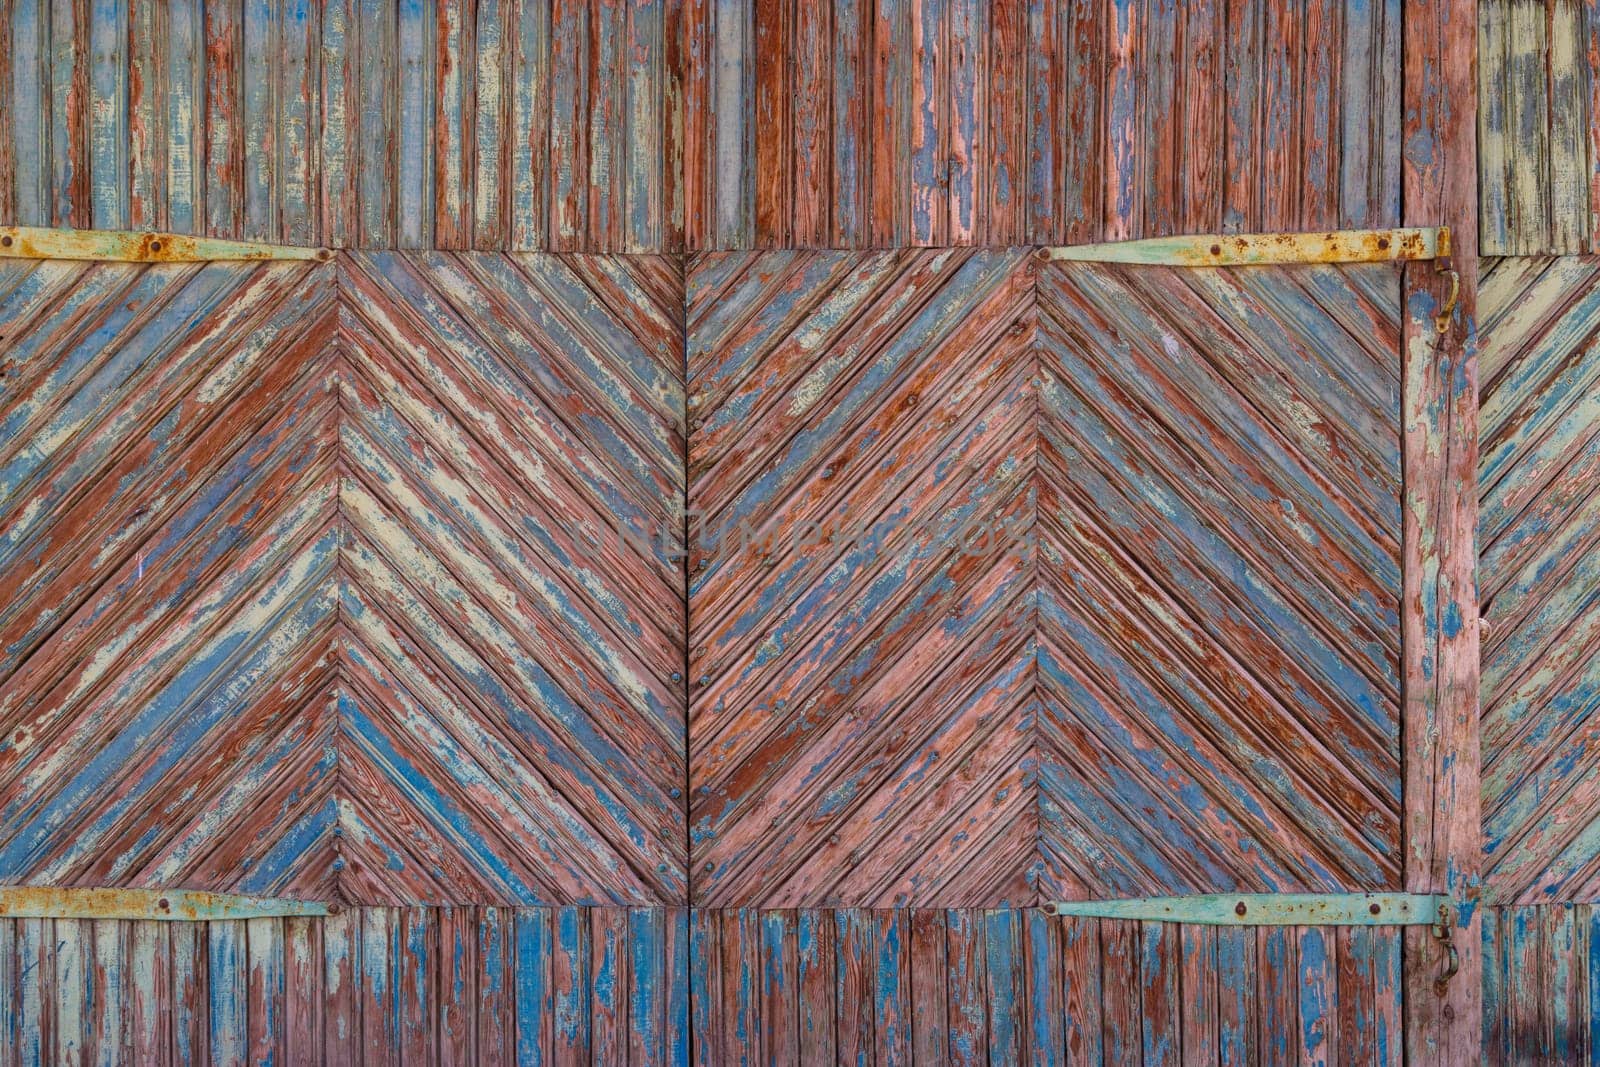 Artistic old wooden planks gate texture with peeled brown and blue paint layers under sun-bleached blue paint layer. Full-frame flat background and texture.